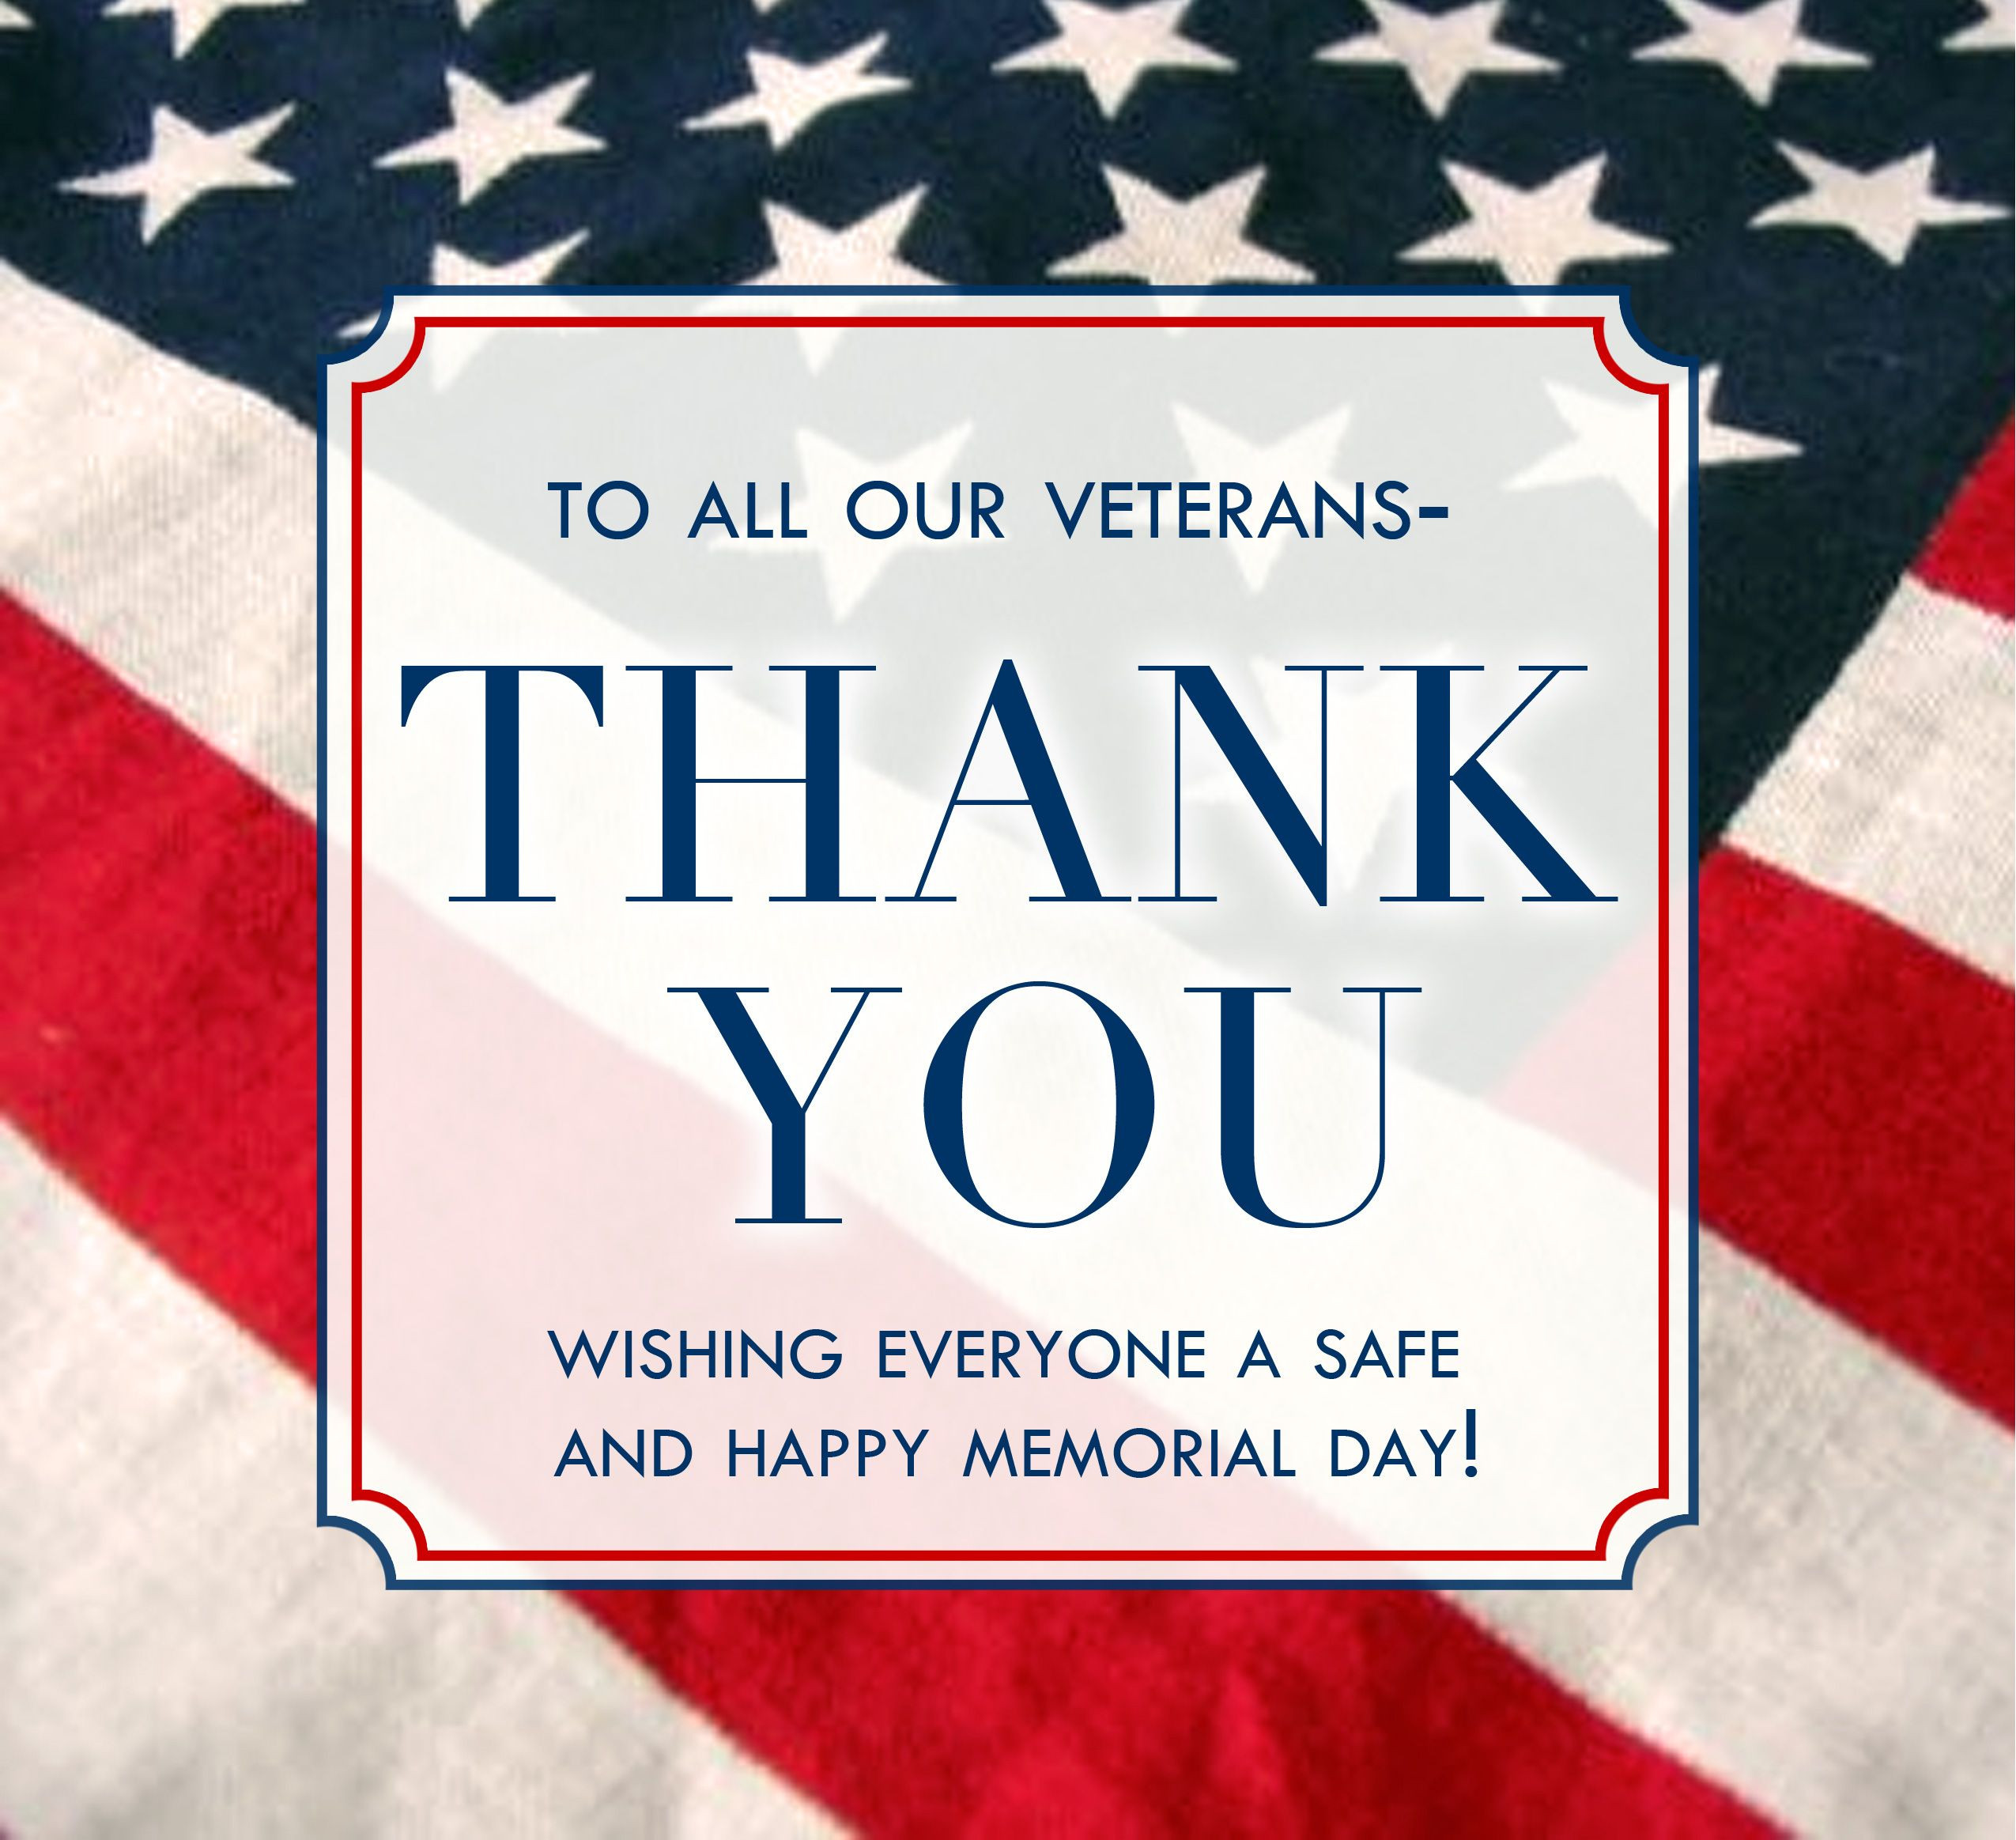 Thank You Memorial Day Quotes
 BOXHILL wishes to thank all of our veterans for their